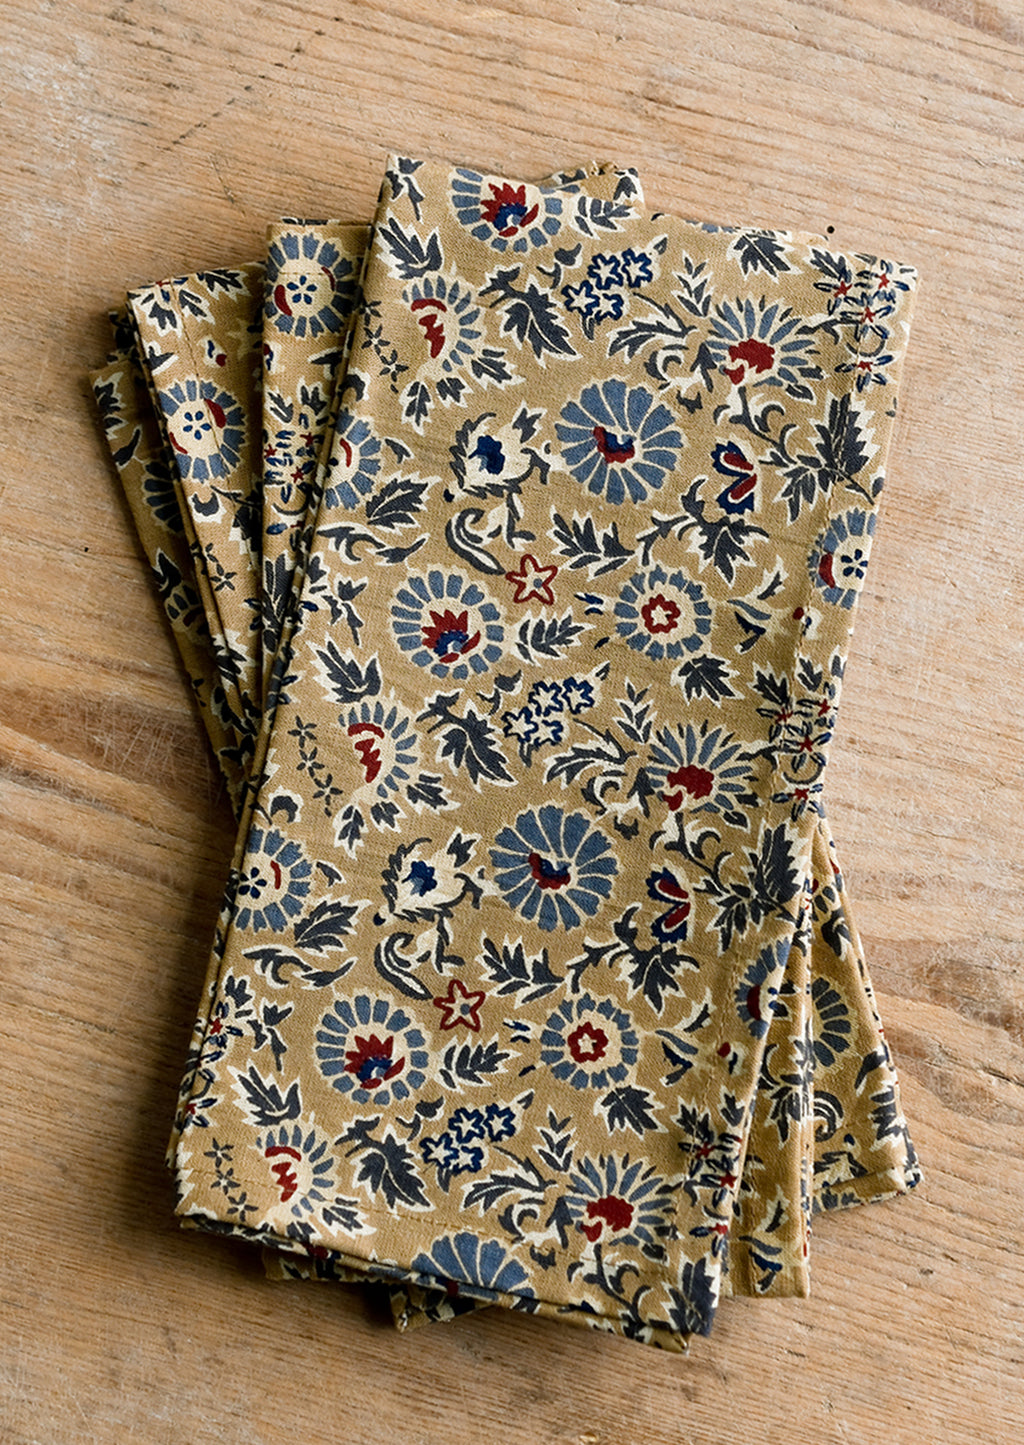 1: A floral print napkin set in brown, indigo and red.